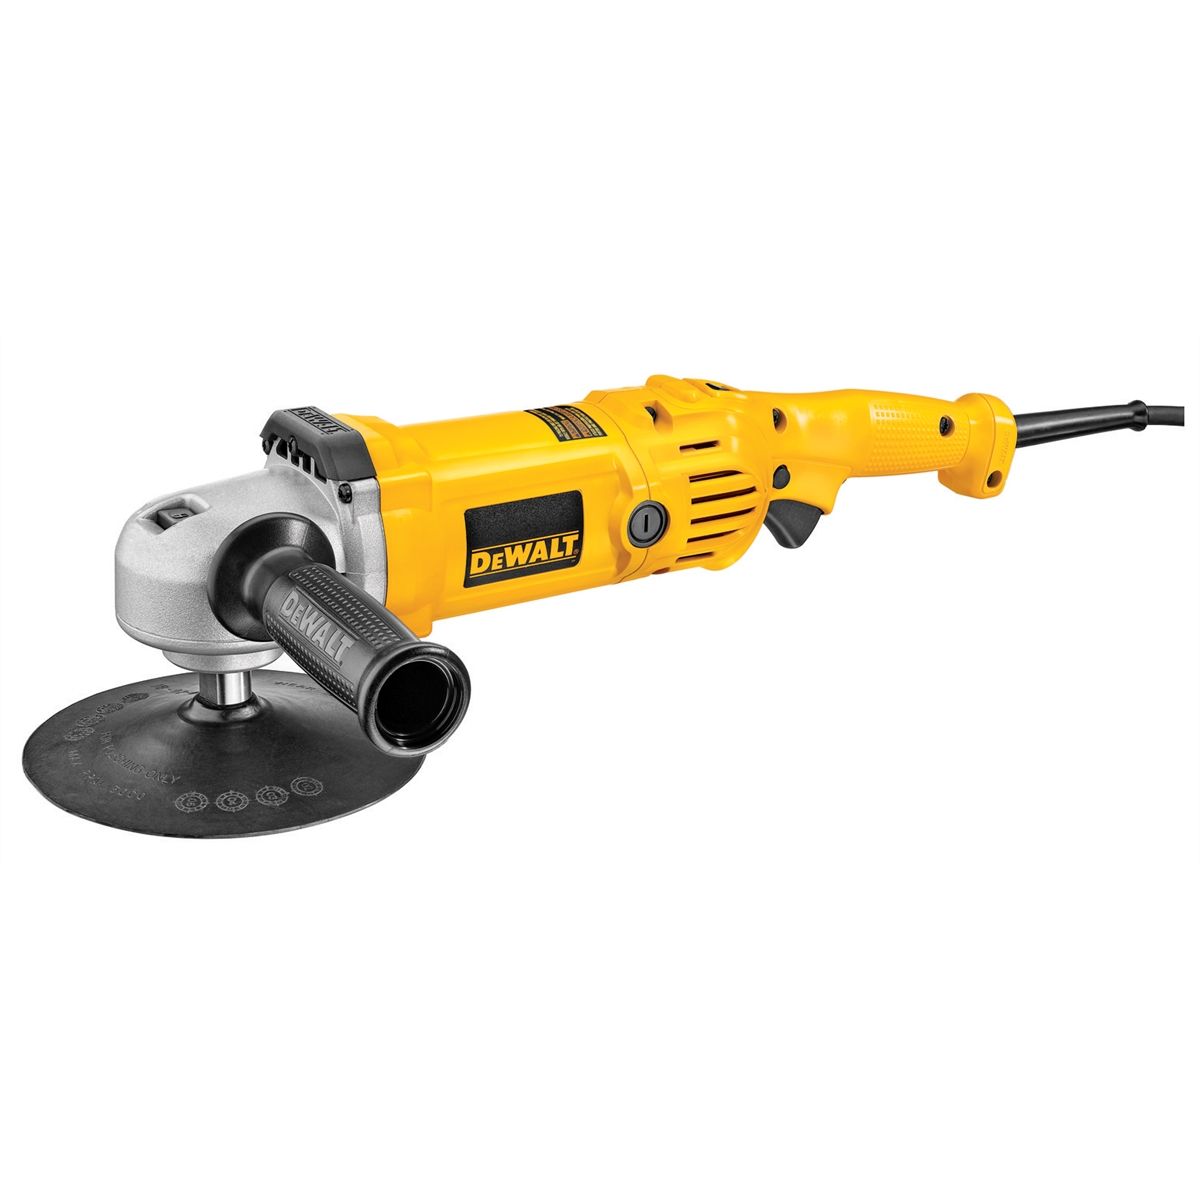 7 Inch / 9 Inch Variable Speed Polisher